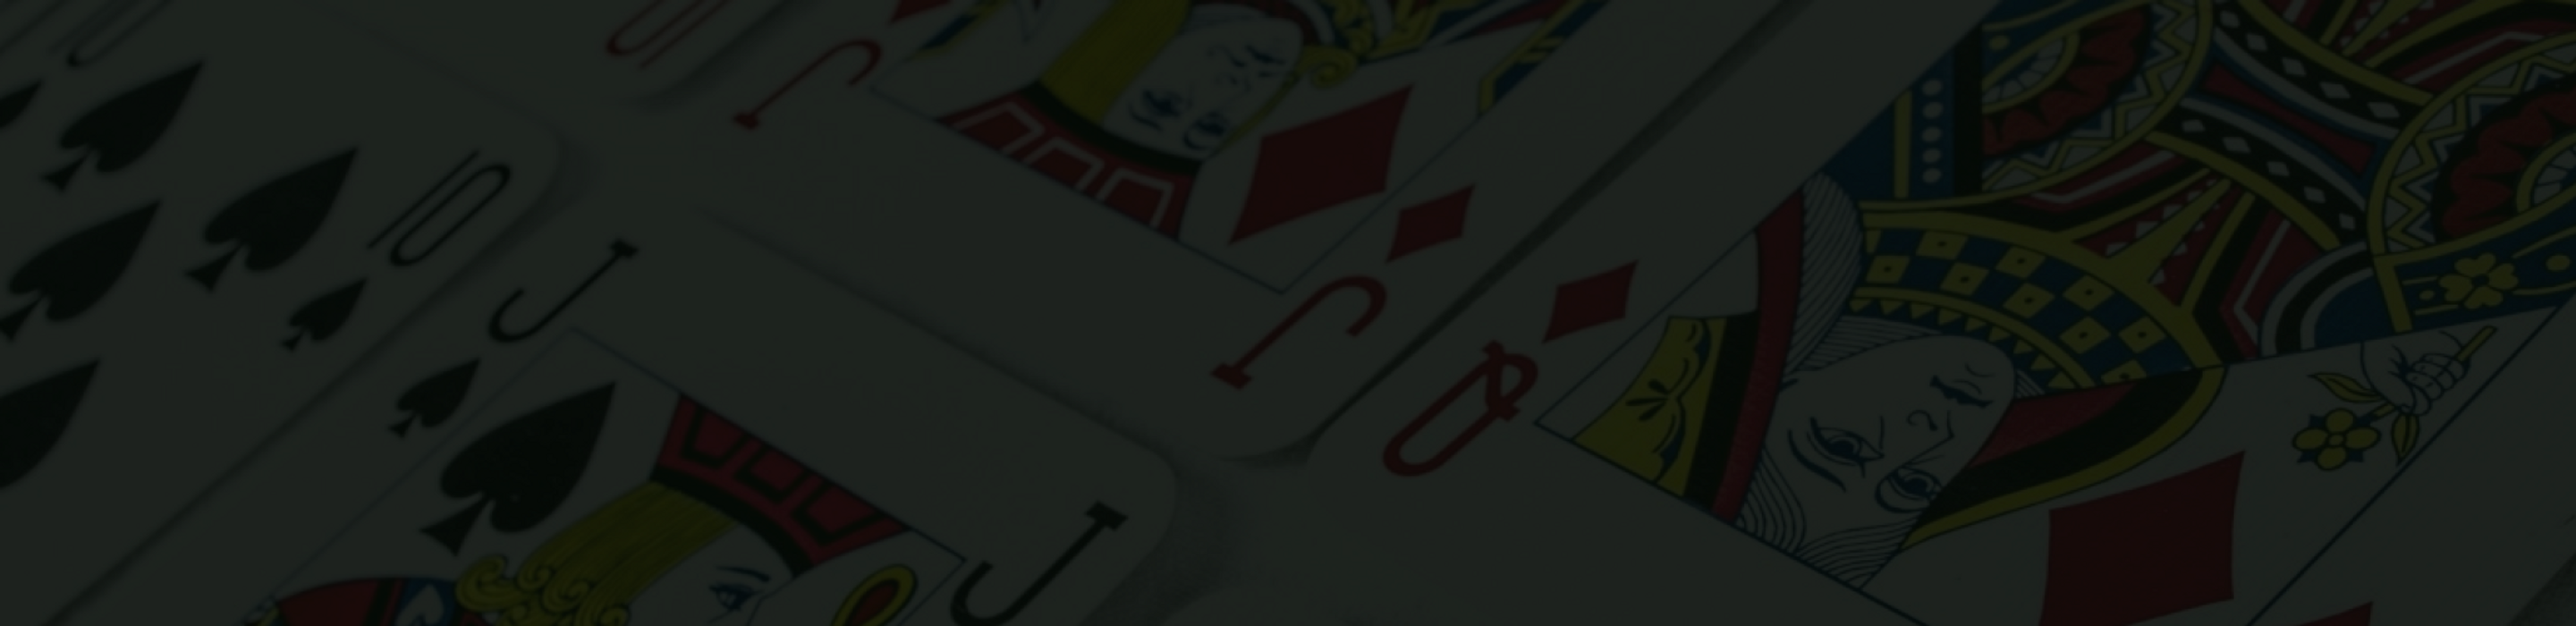 Casino Review Banner